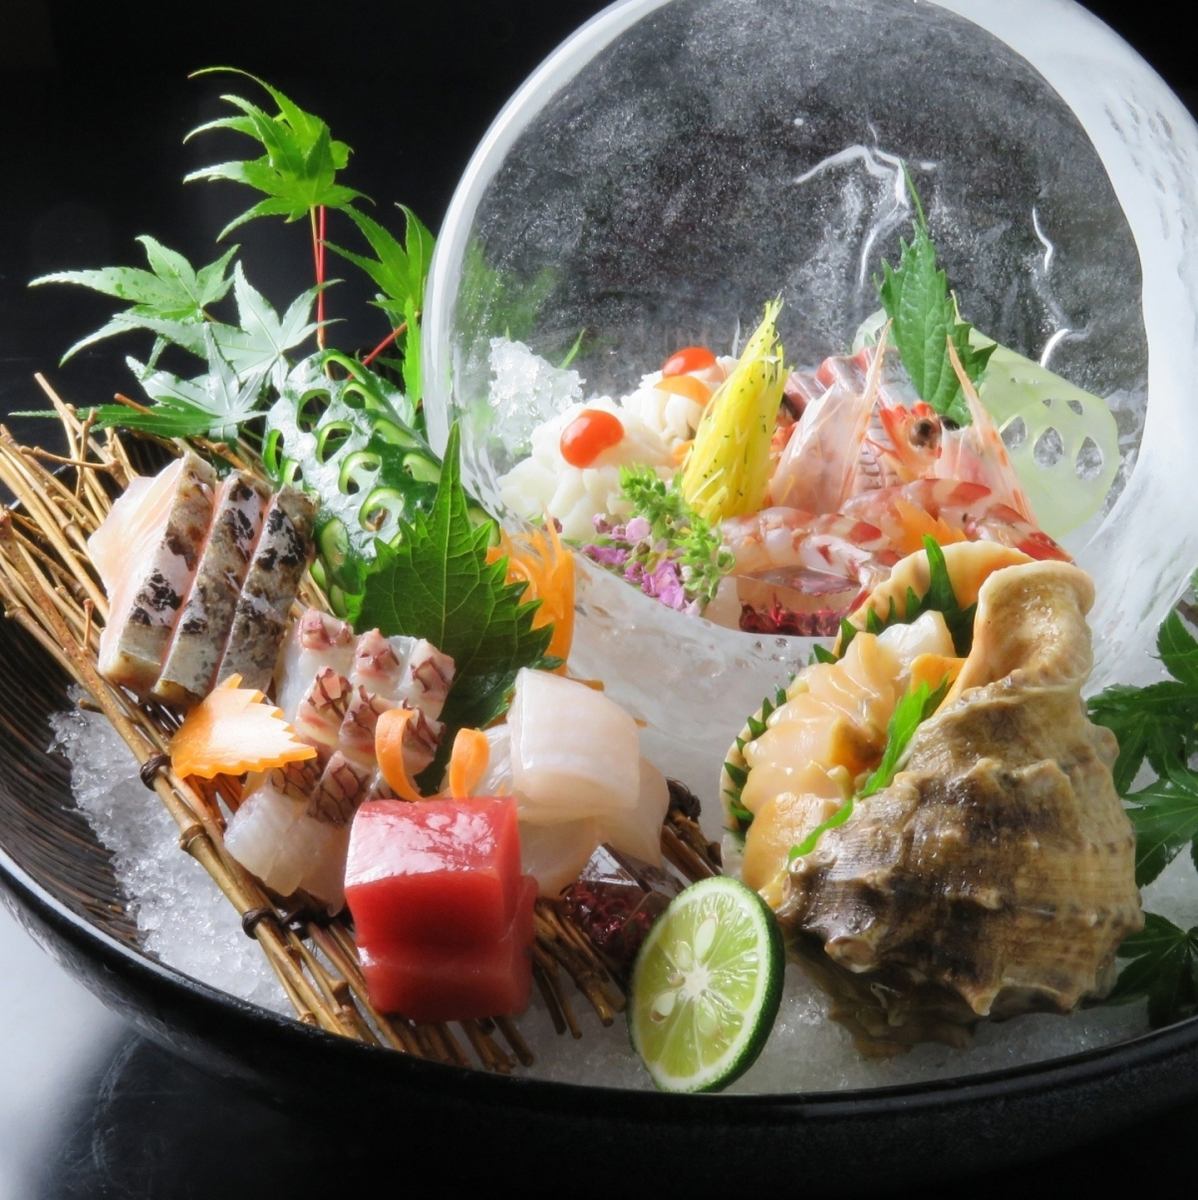 Enjoy delicious fresh fish from all four seasons with the best serving! Sushi made with seasonal fish is also popular.